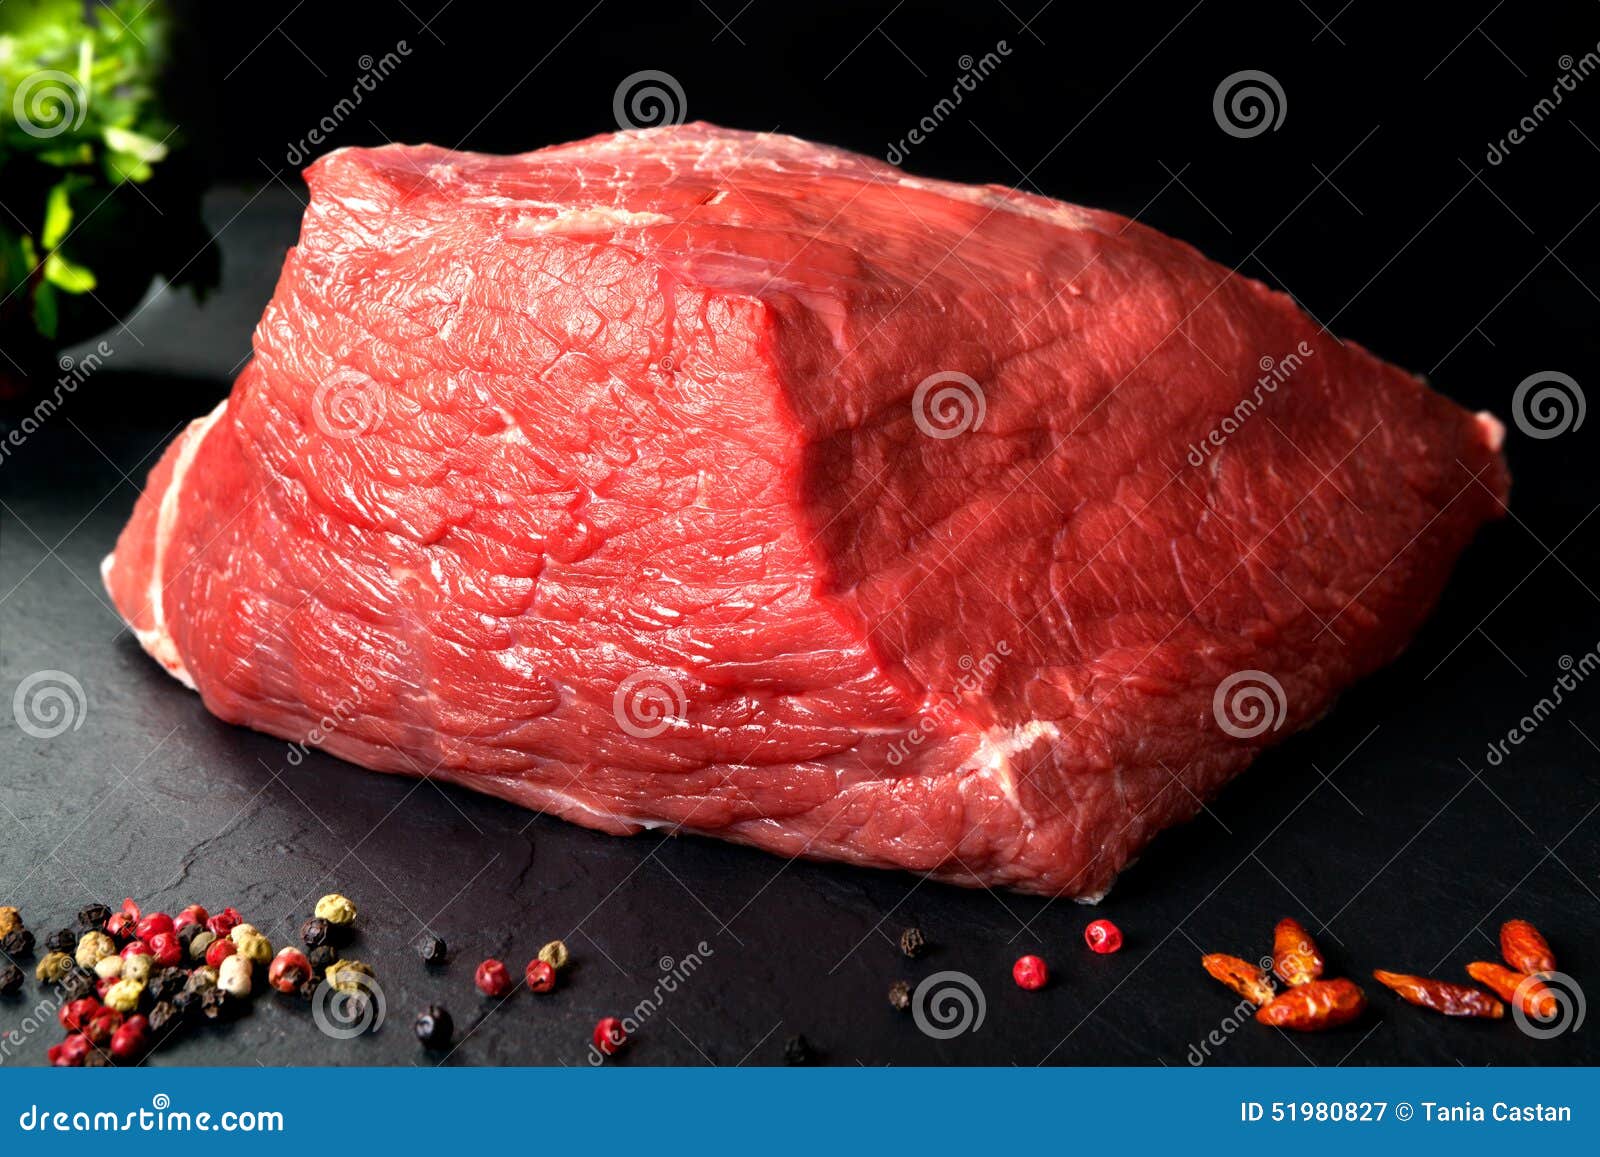 uncooked fresh pork and beef. raw red meat with black stone background and spices